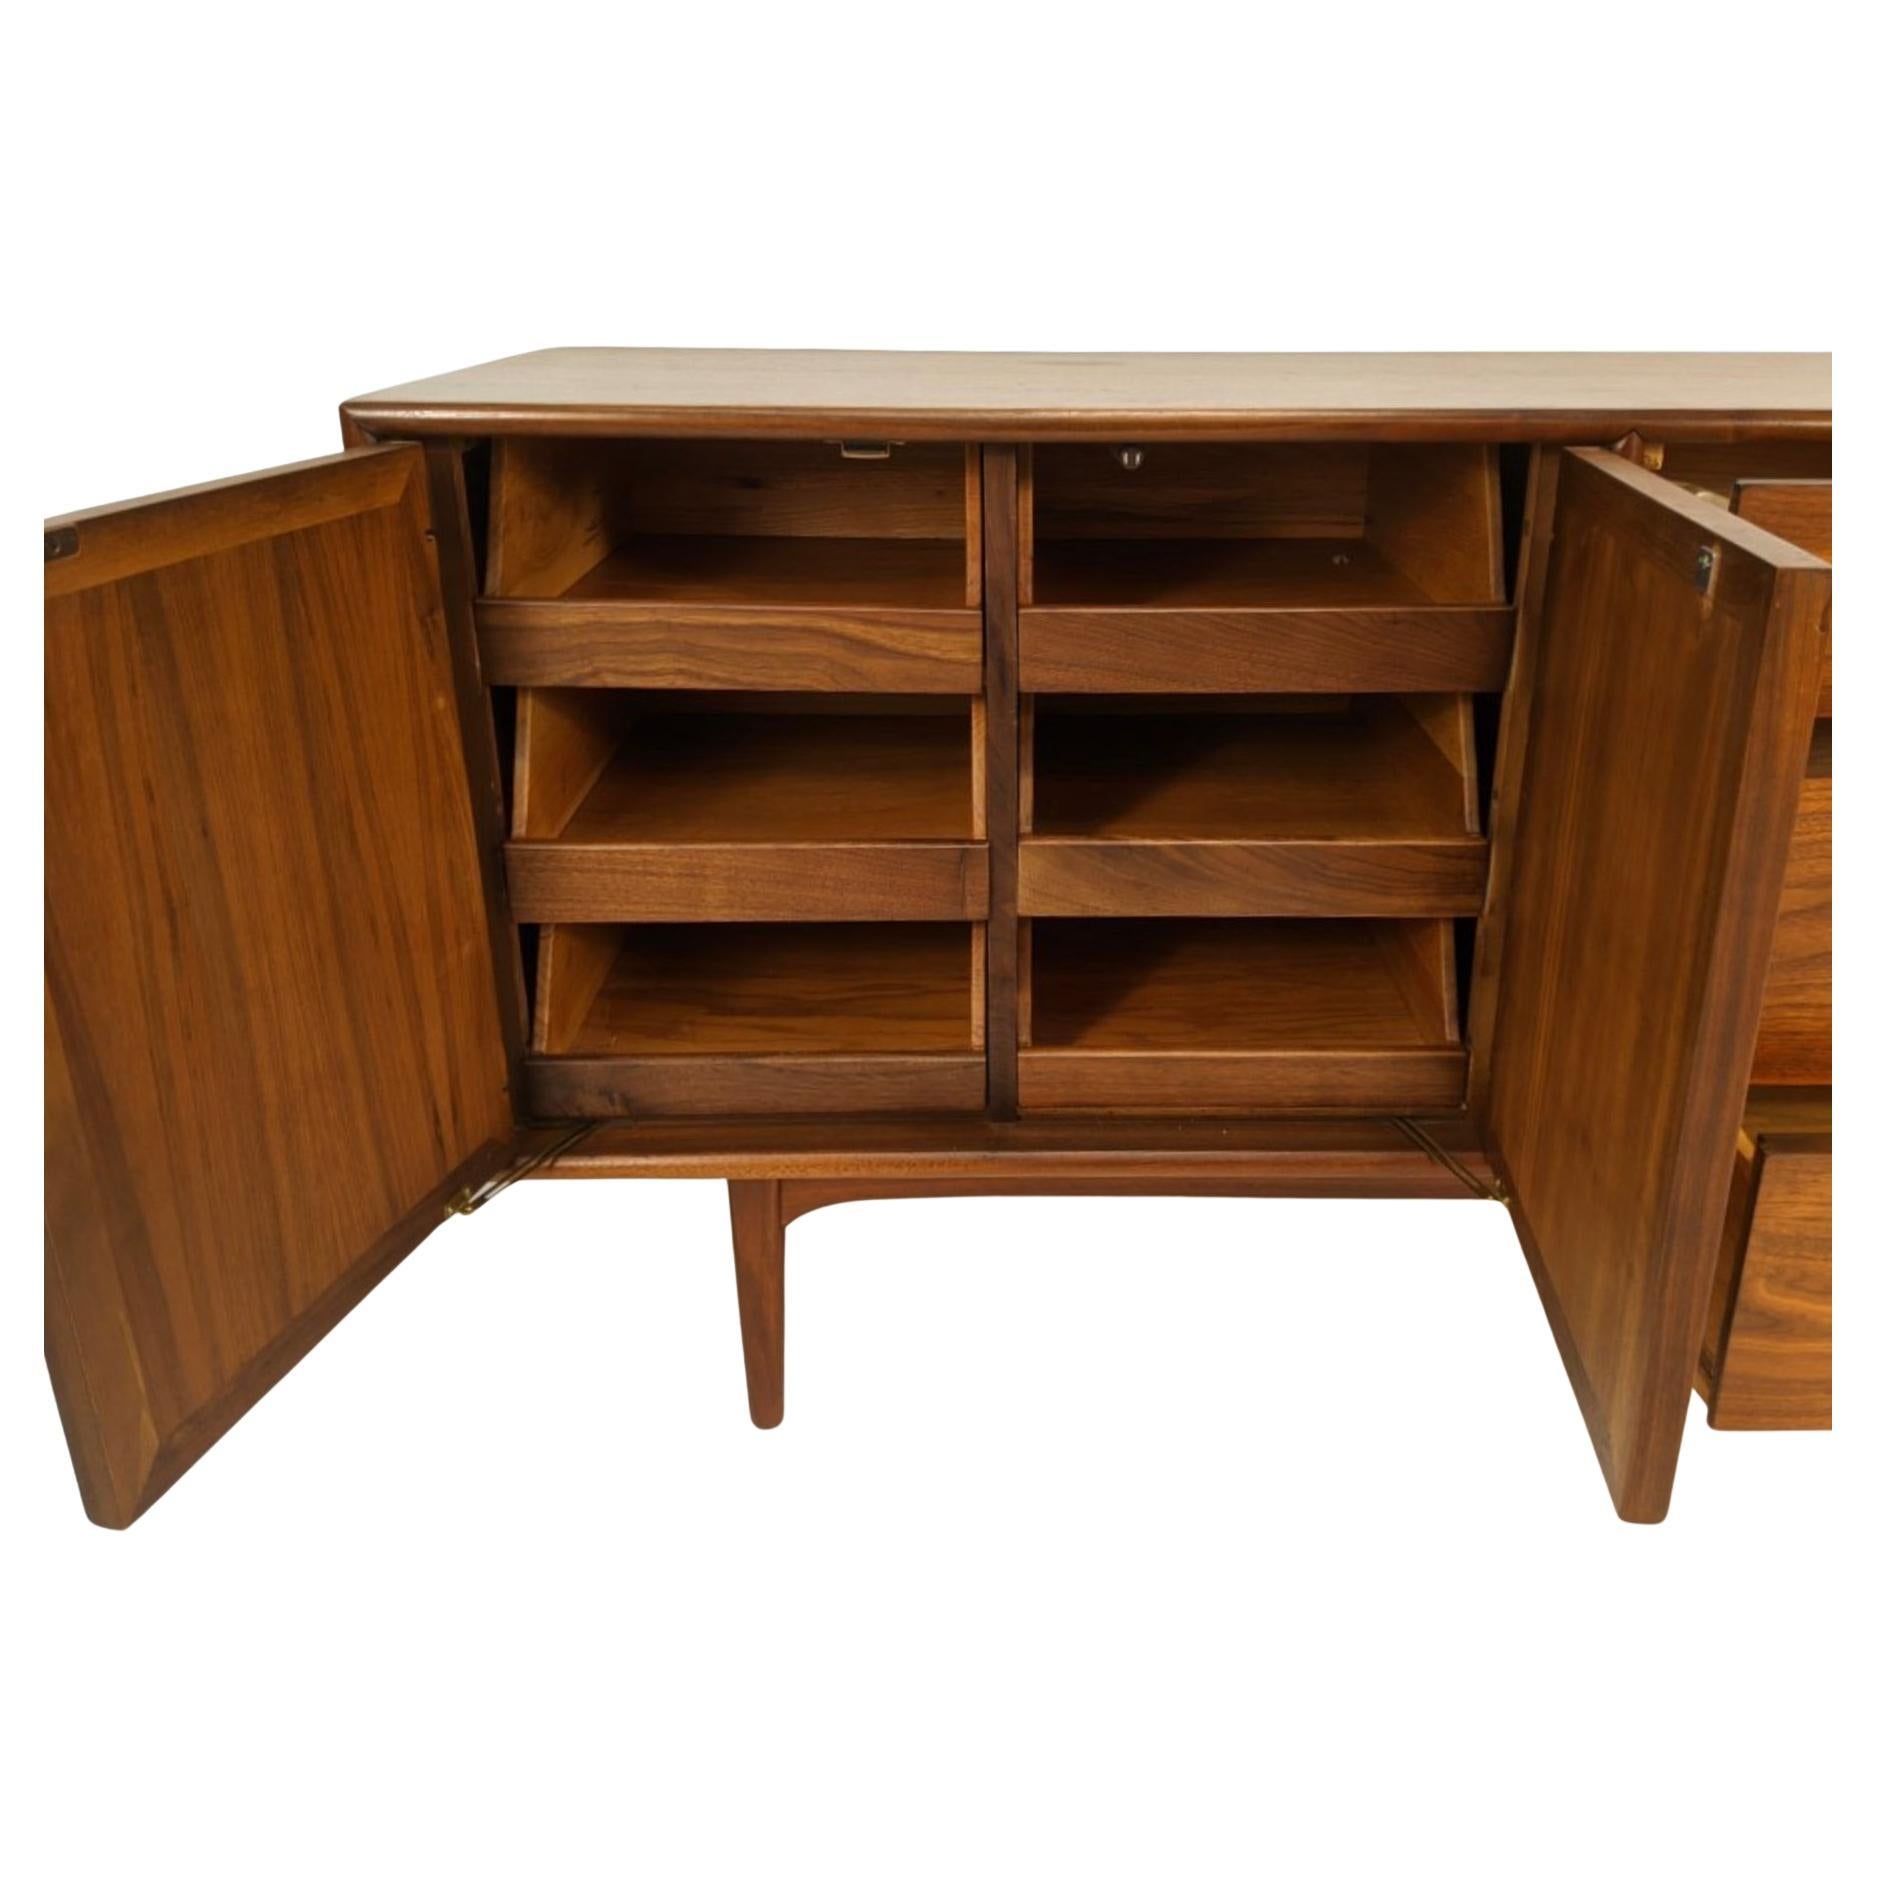 A gorgeous Mid-Century Modern walnut triple dresser from the desirable declaration line designed by Kipp Stewart and Stewart MacDougall for Drexel in the 1950s.  On the right are four smooth sliding drawers with original spherical white porcelain